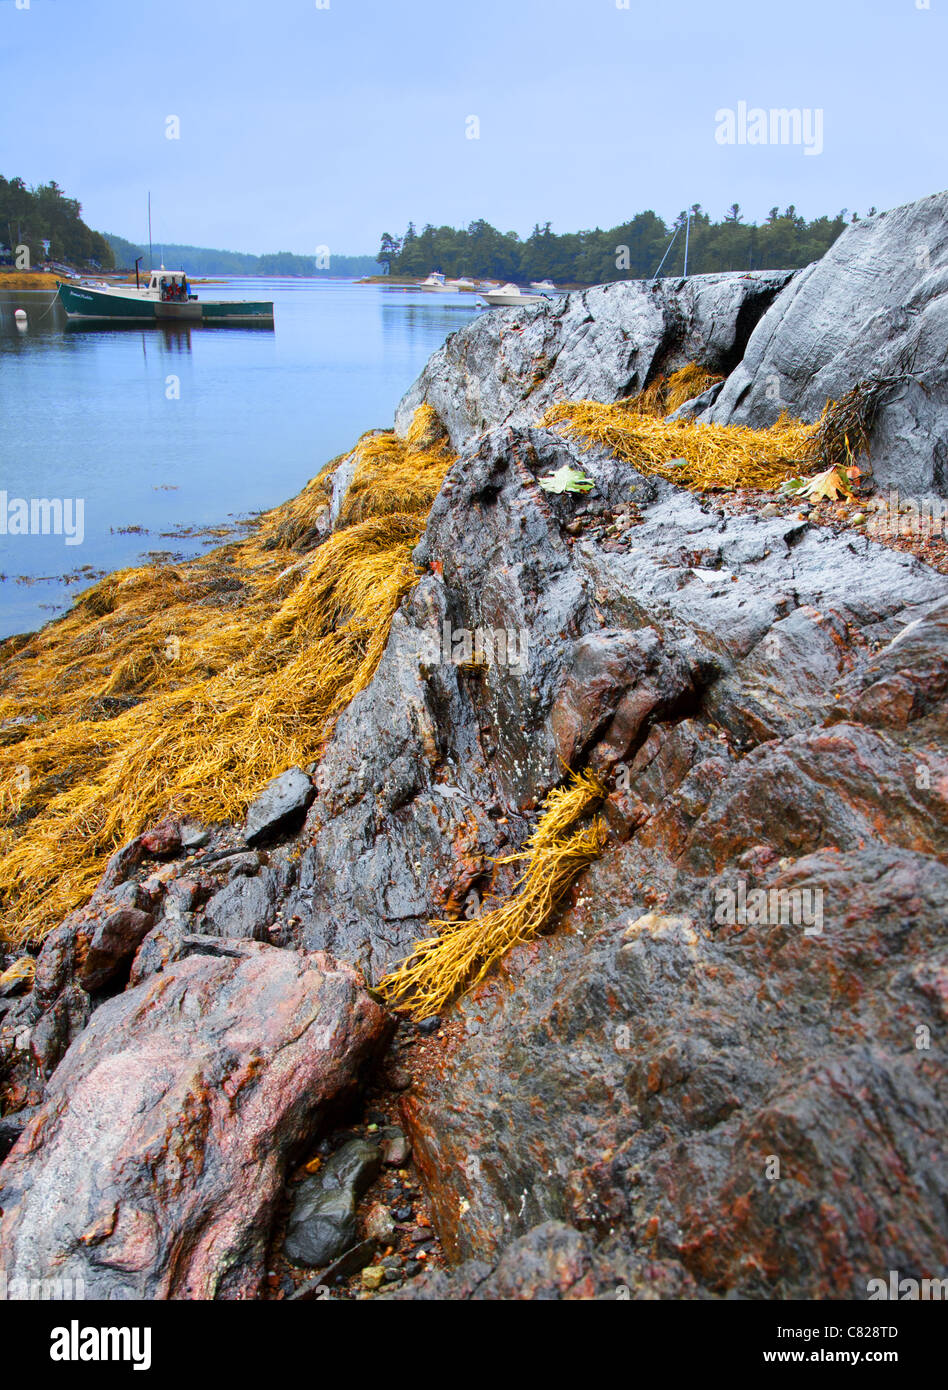 A view of rocks, seaweed and a boat in the distance Stock Photo